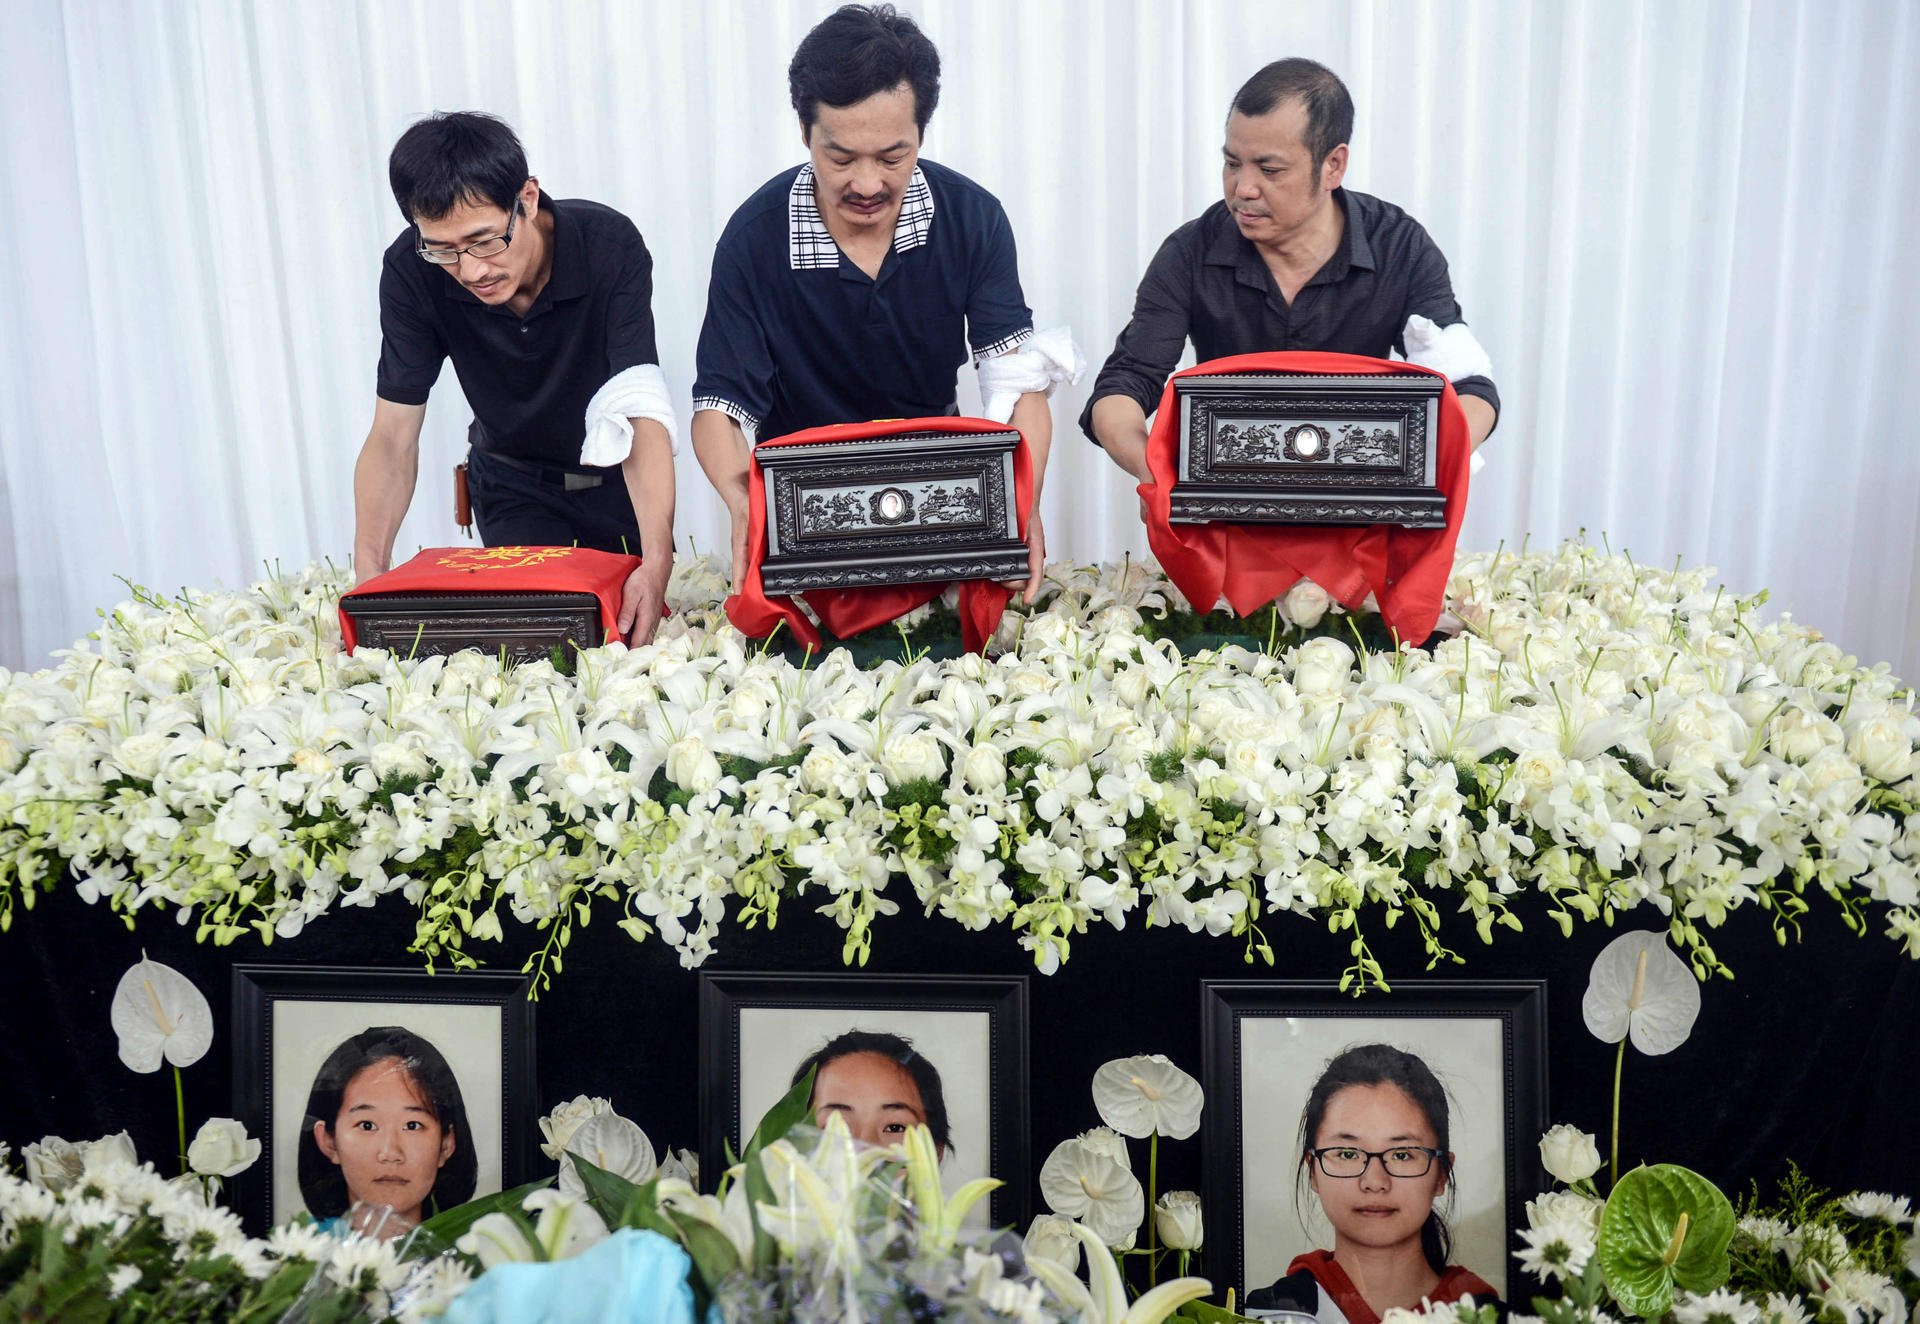 The fathers of pupils (from left) Liu Yipeng, Wang Linjia and Ye Mengyuan - victims of the Asiana plane crash in San Francisco - carry their daughters' urns at a service in Jiangshan yesterday. Photo: Xinhua